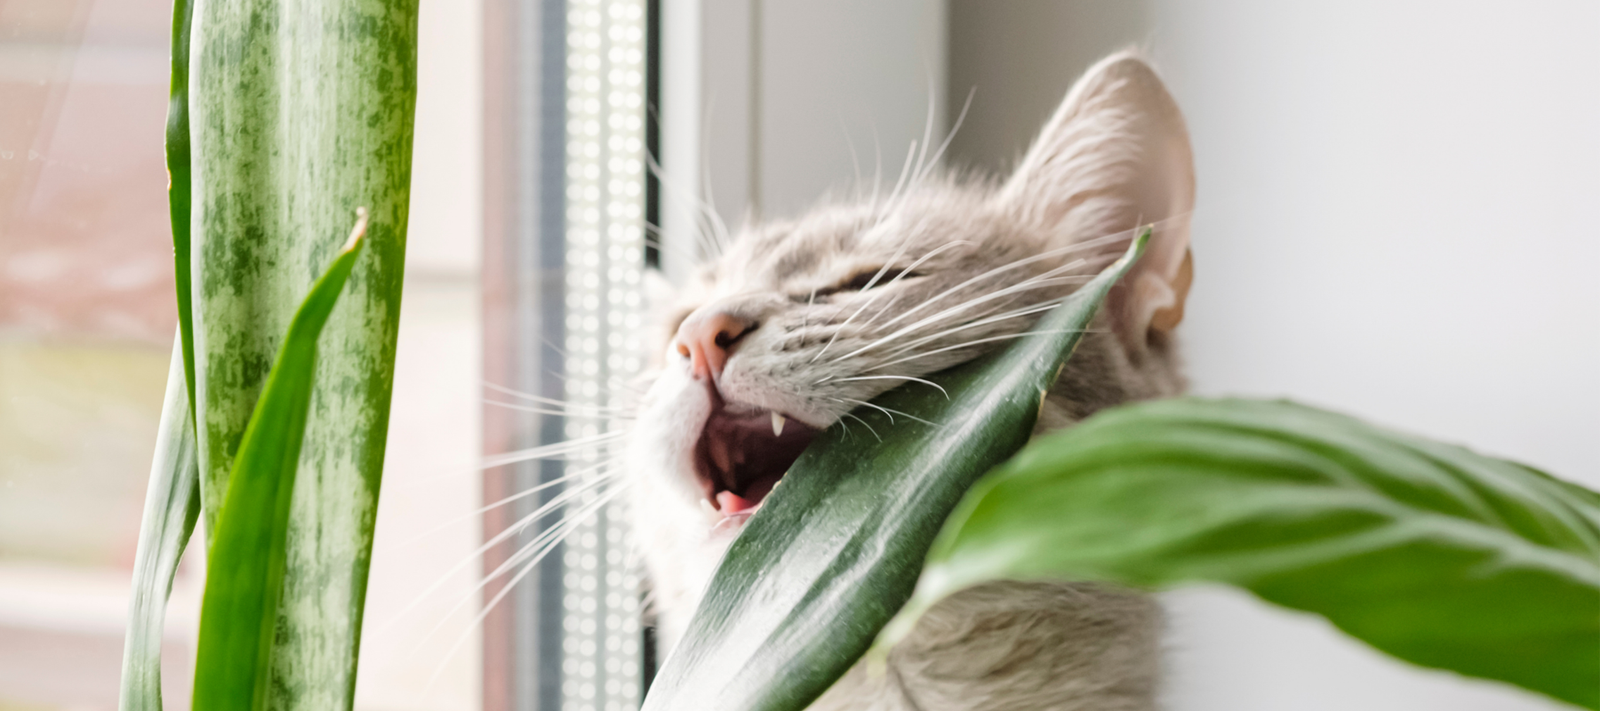 Cat Lovers Beware: Recognize the Signs of These Common Cat